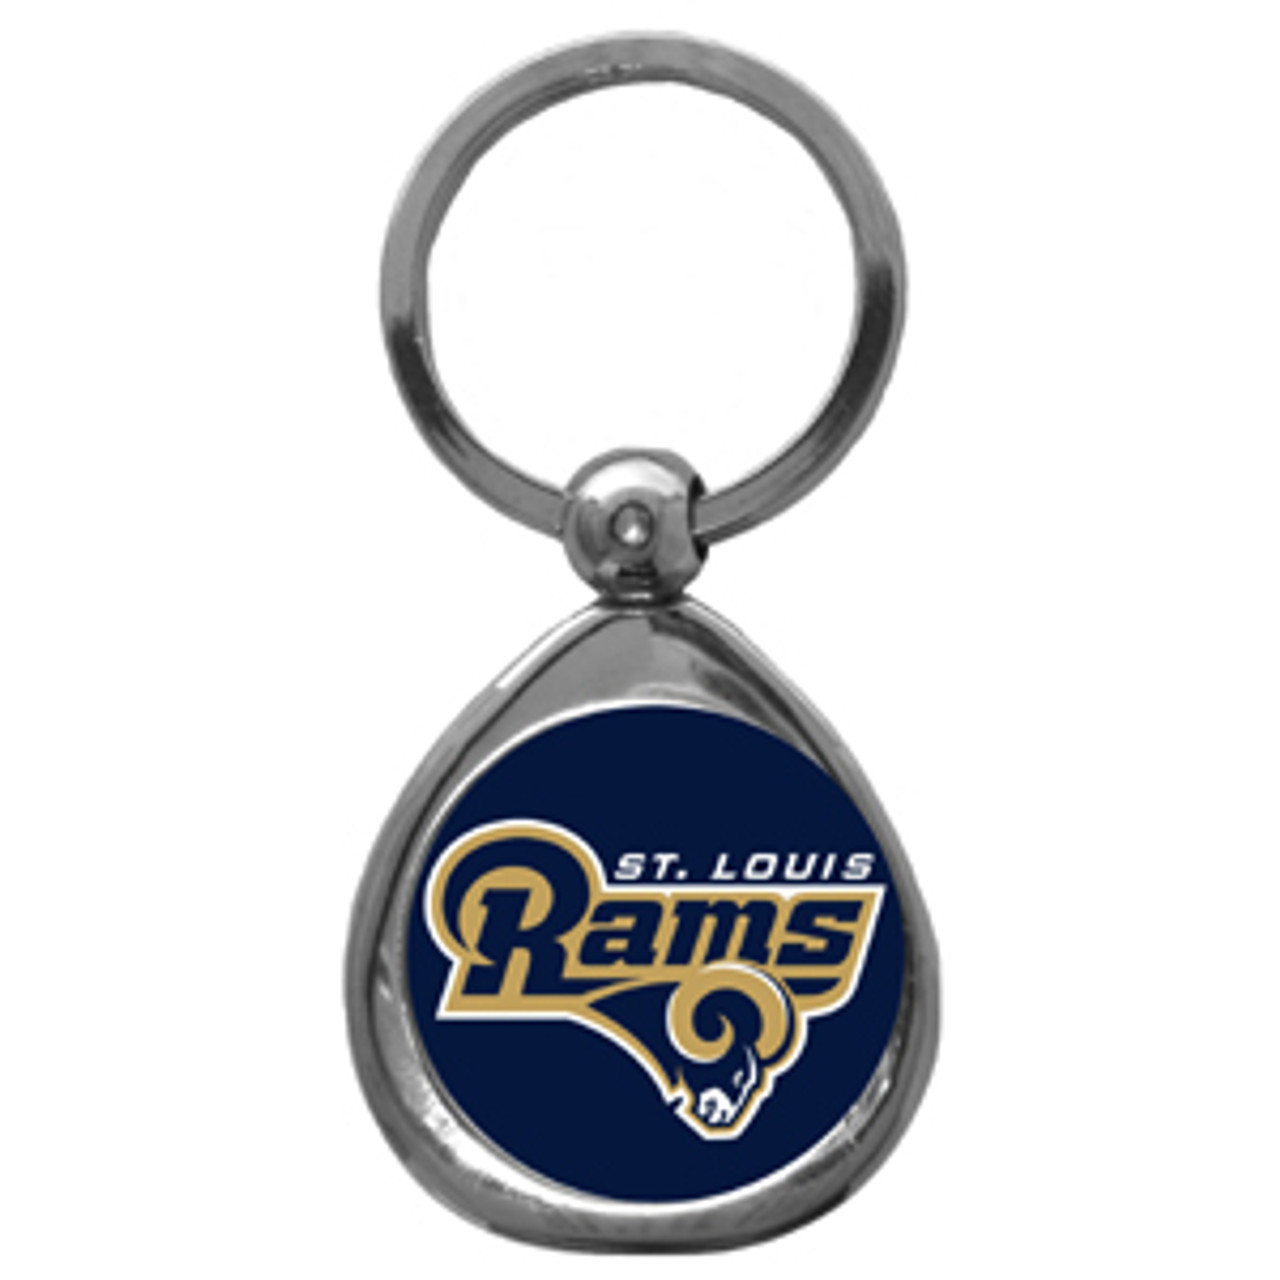 Saint Louis Los Angeles Rams Key Chain And Bottle Opener Football NFL Sports